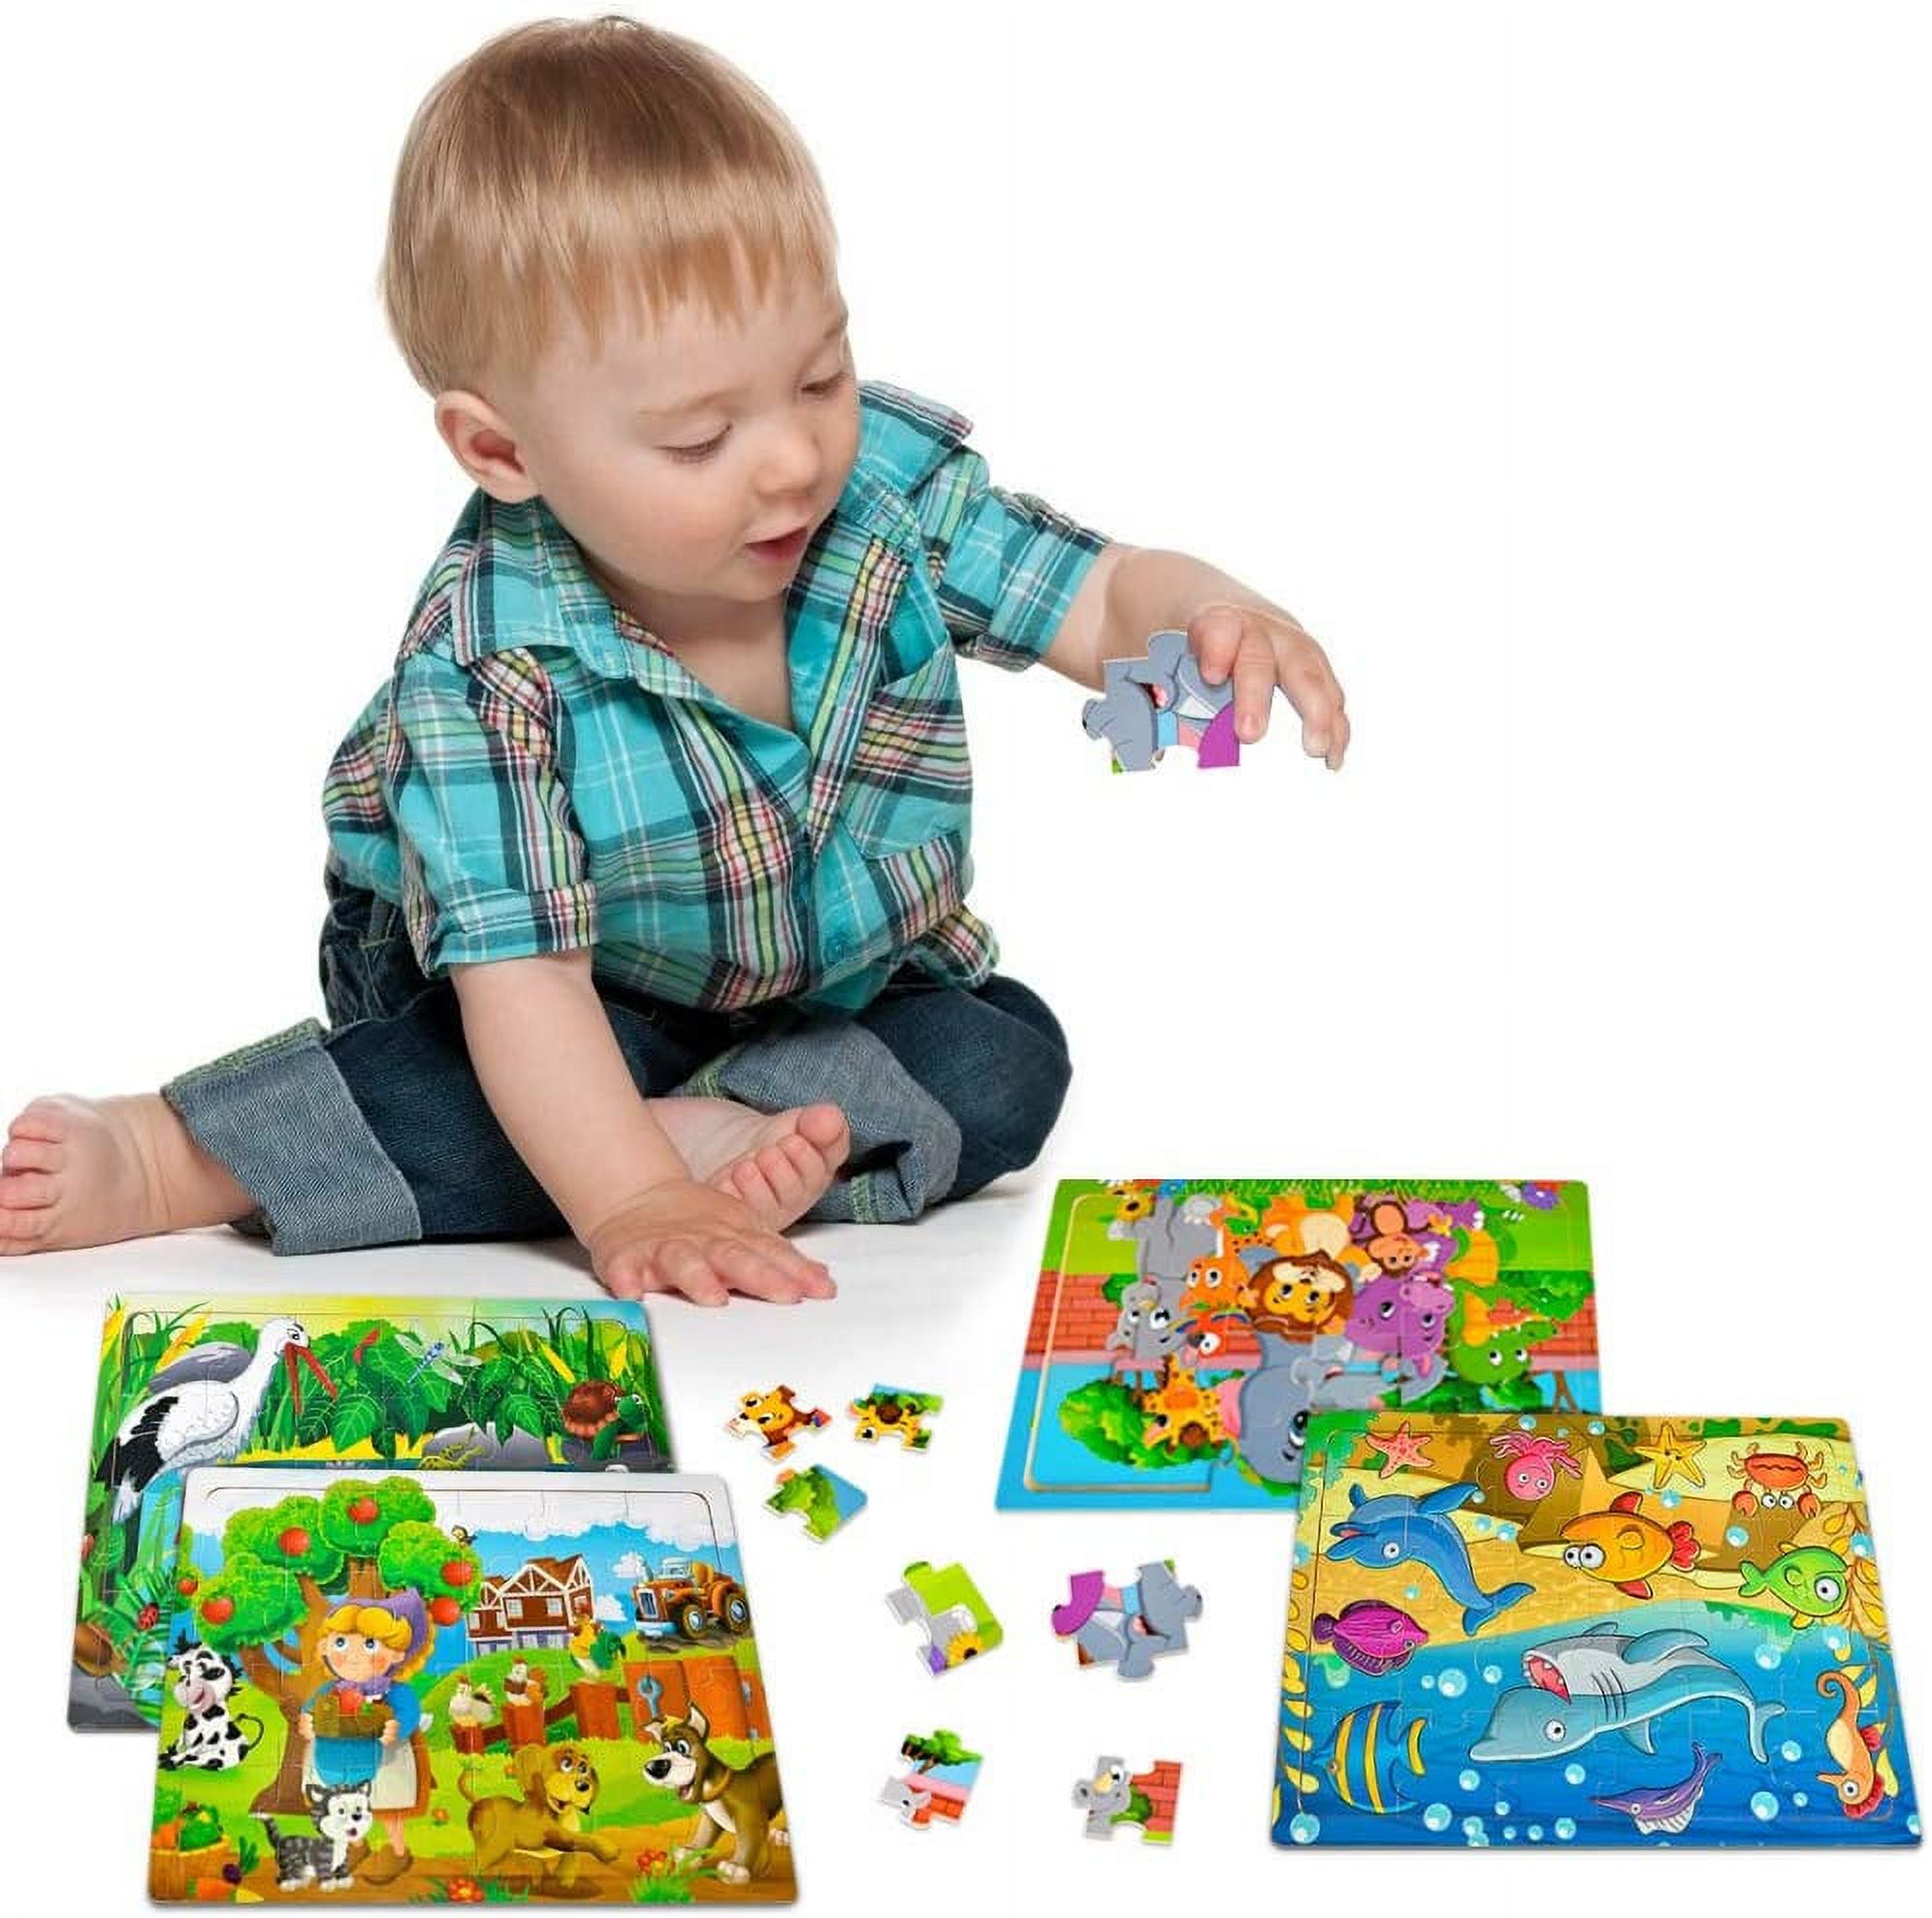 Wooden Puzzles for Kids Ages 2-5 - 24 Piece Puzzle for Toddlers Preschool Kids Jigsaw Puzzles - 4 Pack Vibrant Children Theme Learning Educational Puzzle Set for Kids 2 3 4 5 Year Old - image 5 of 7